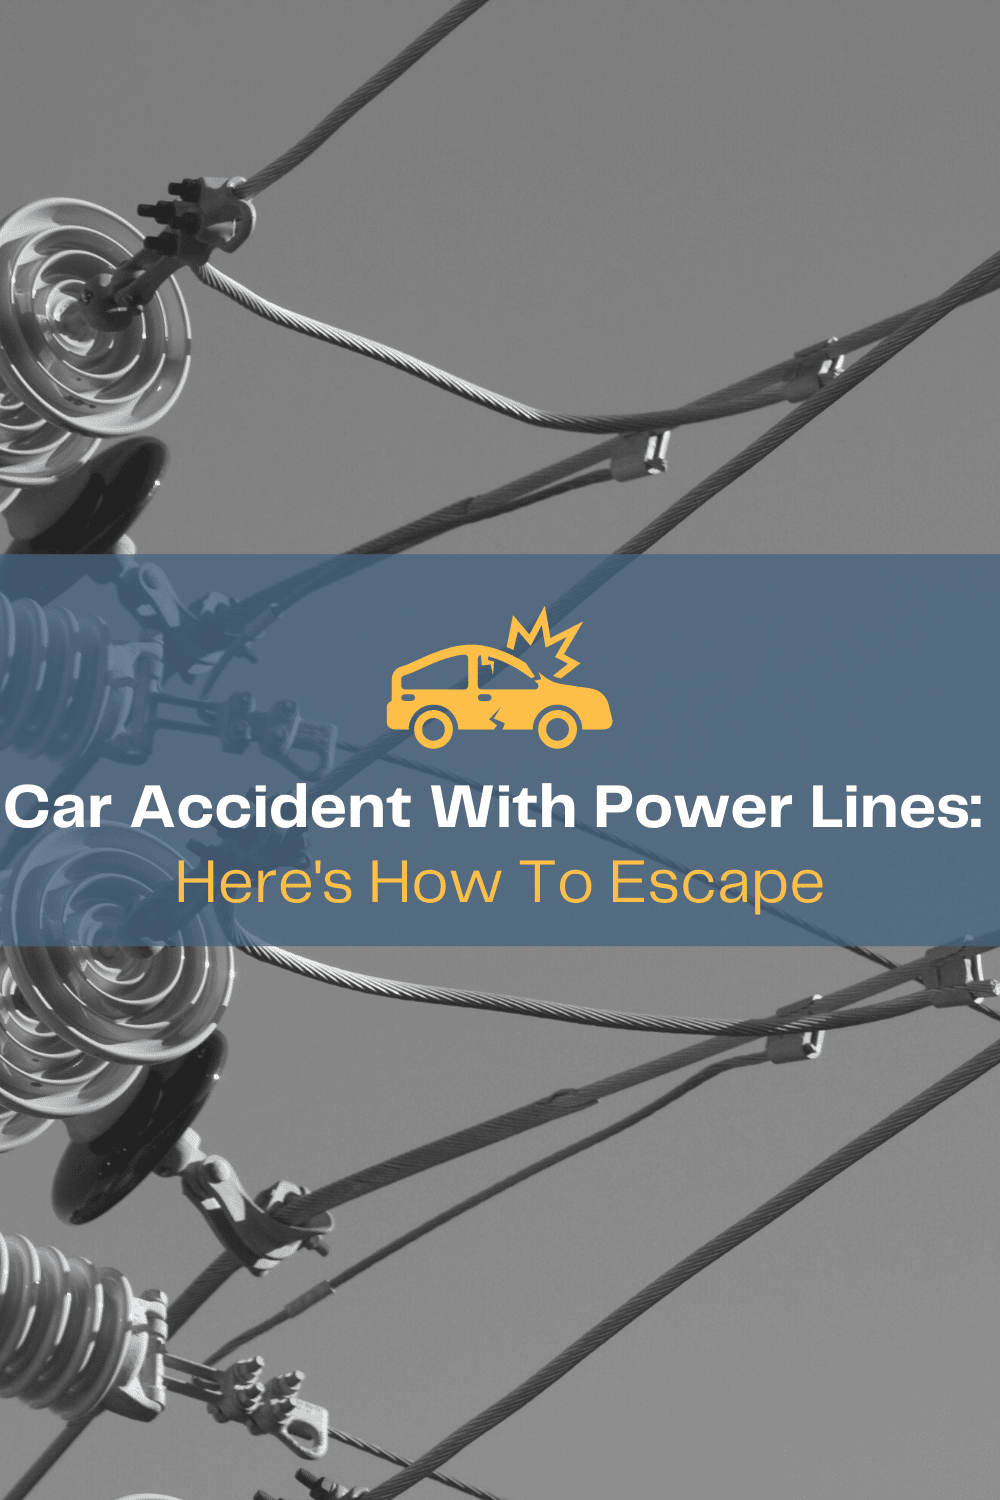 Car Accident With Power Lines: Here’s How To Escape